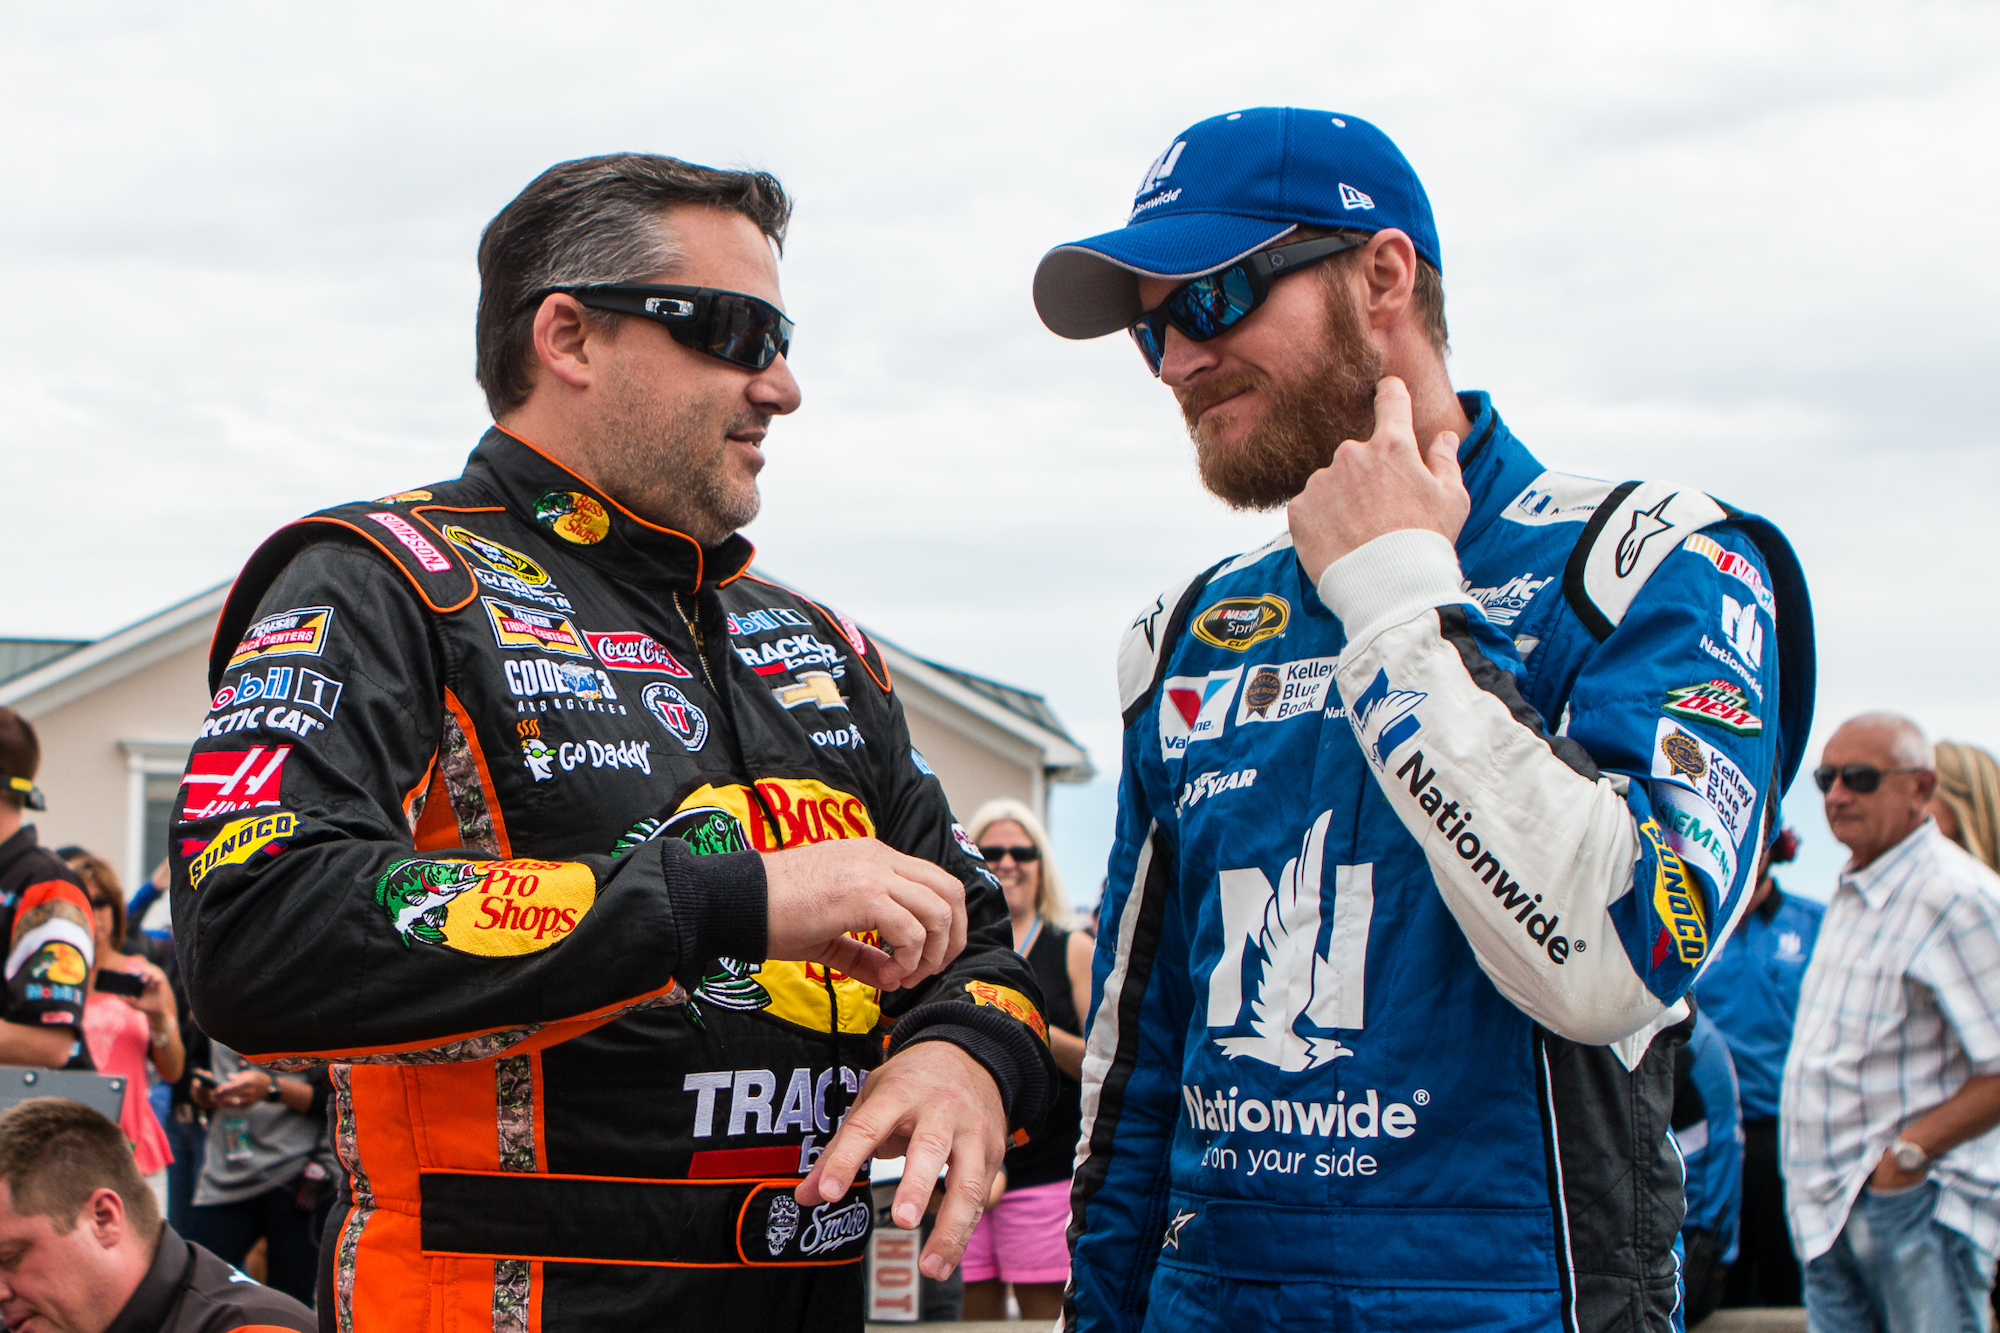 Dale Earnhardt Jr. Calls Out Tony Stewart’s Treatment of SRX Driver While Acknowledging Emotion and Conflict All Part of the Show  